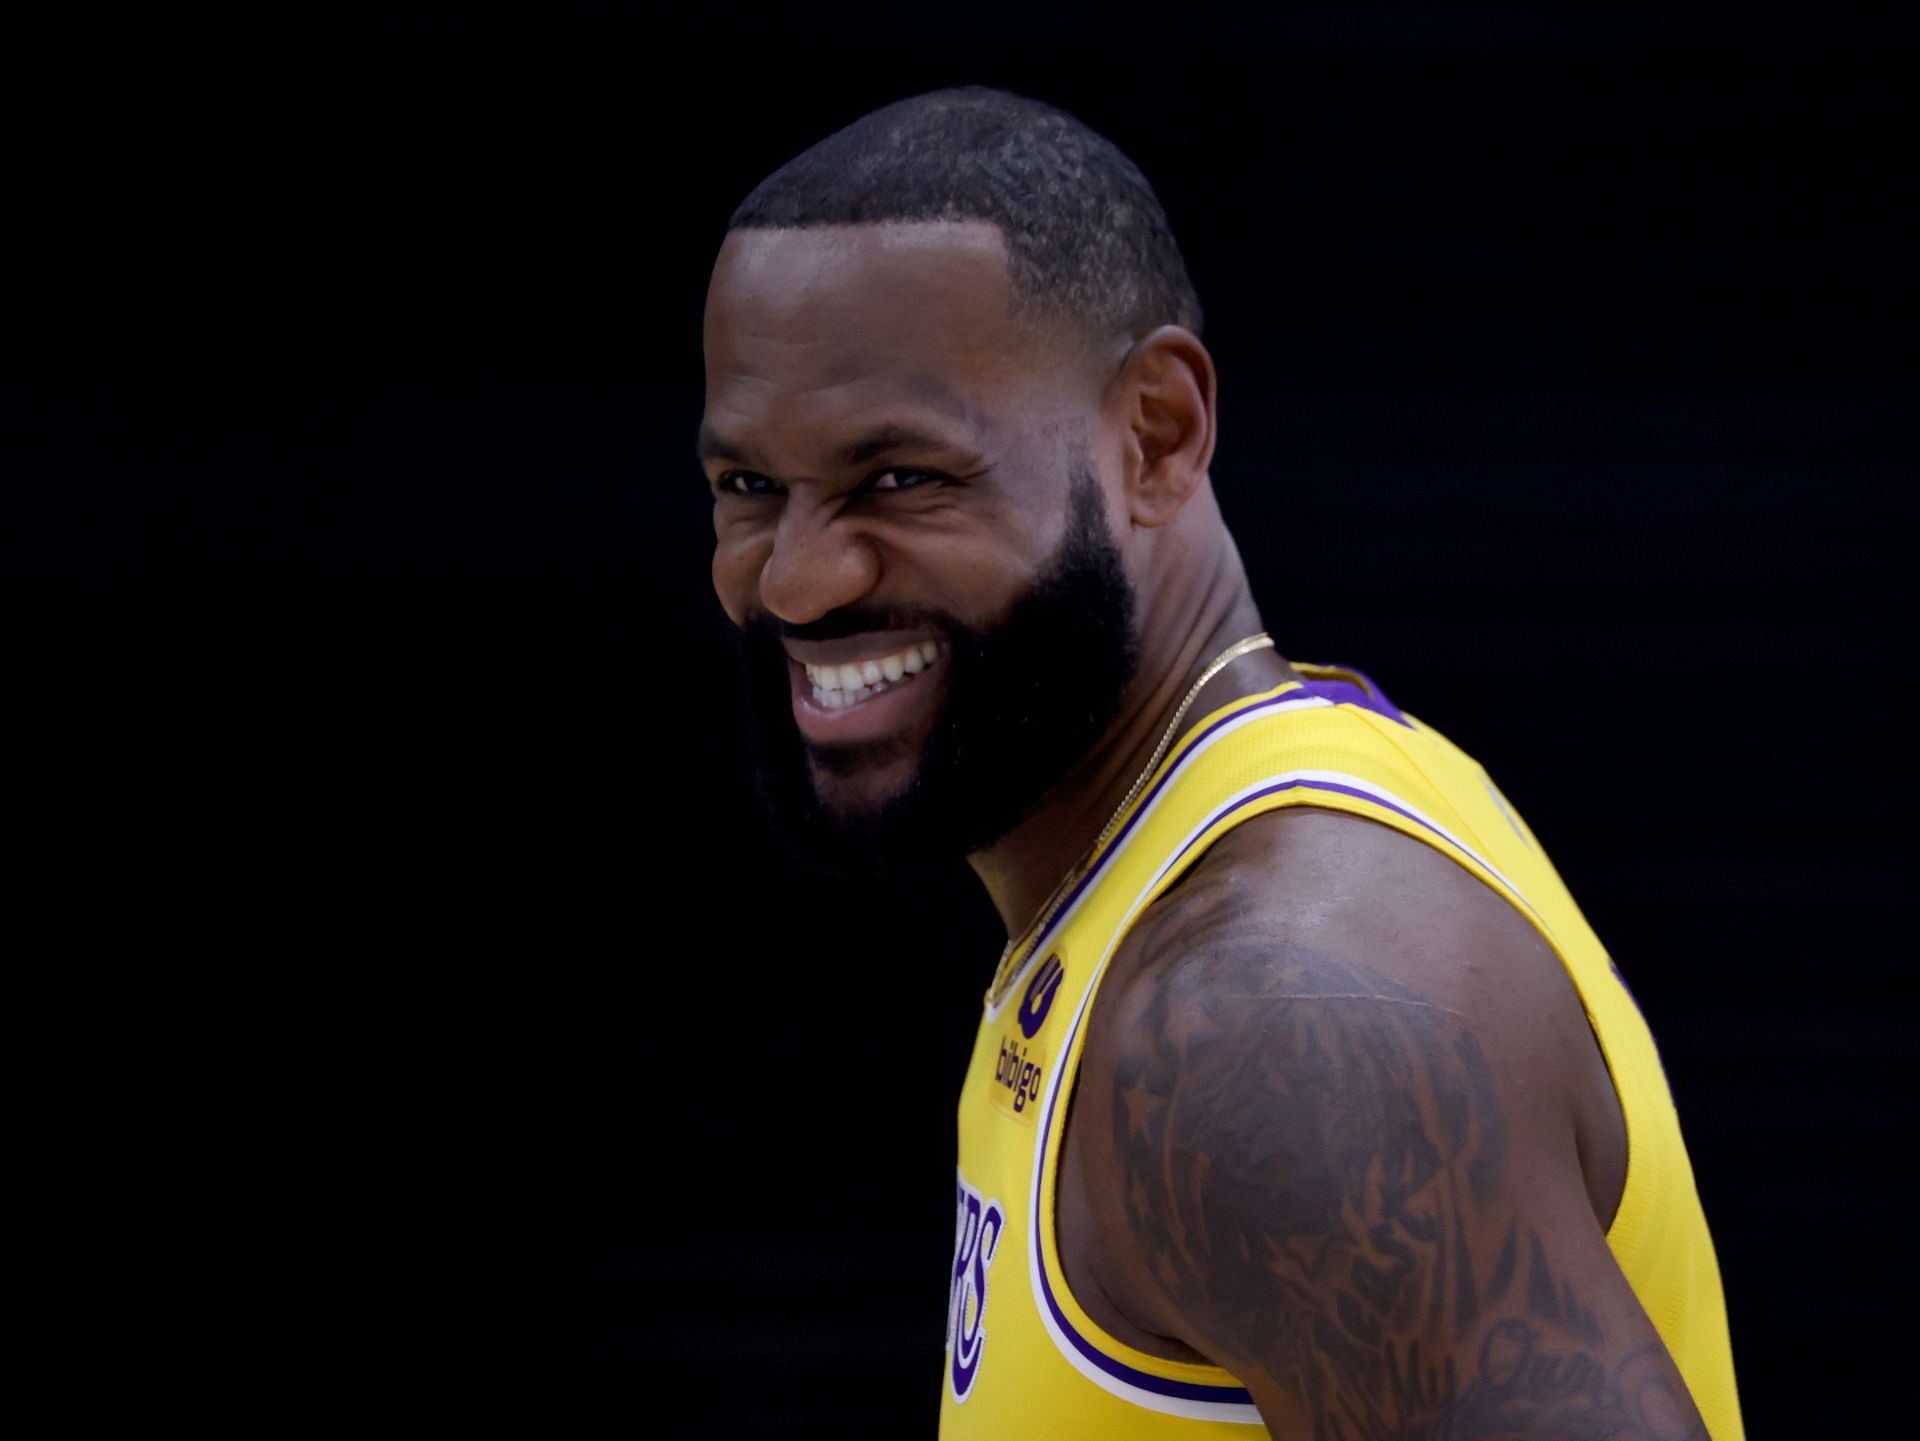 LA Lakers star LeBron James is heading into year 19 of his illustrious NBA career